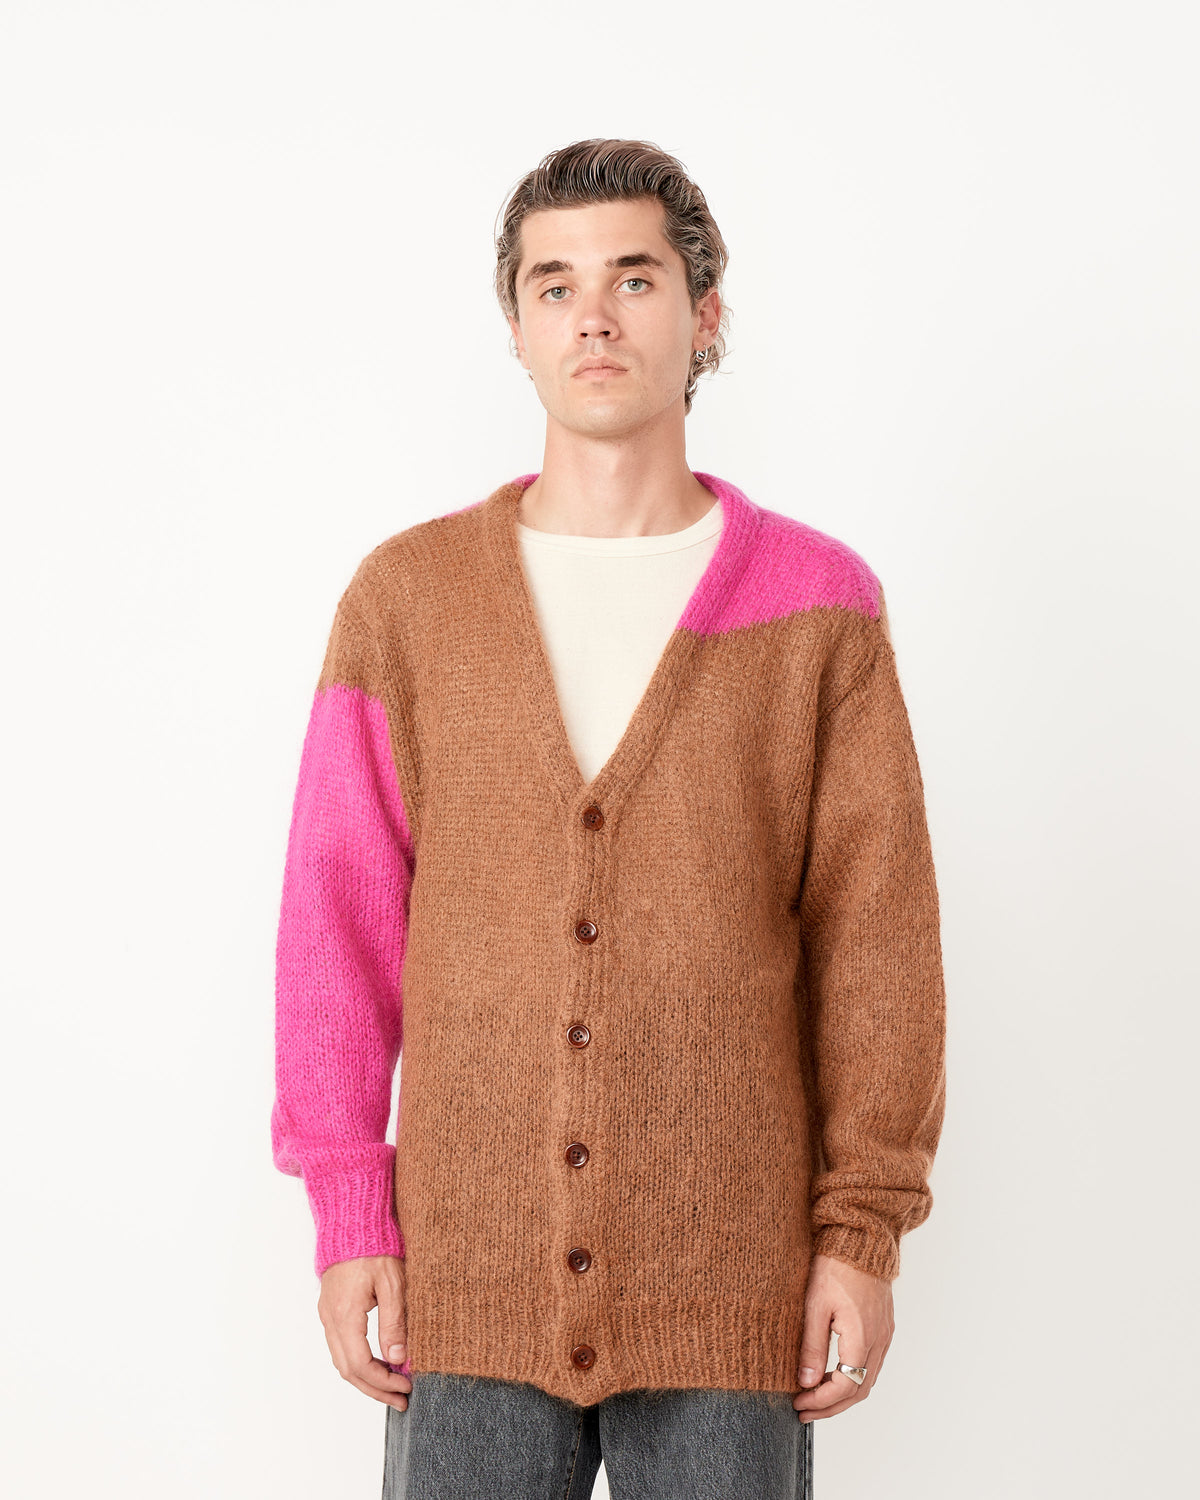 Find Hand Knitted Mohair Cardigan NOMA t.d. now and save money